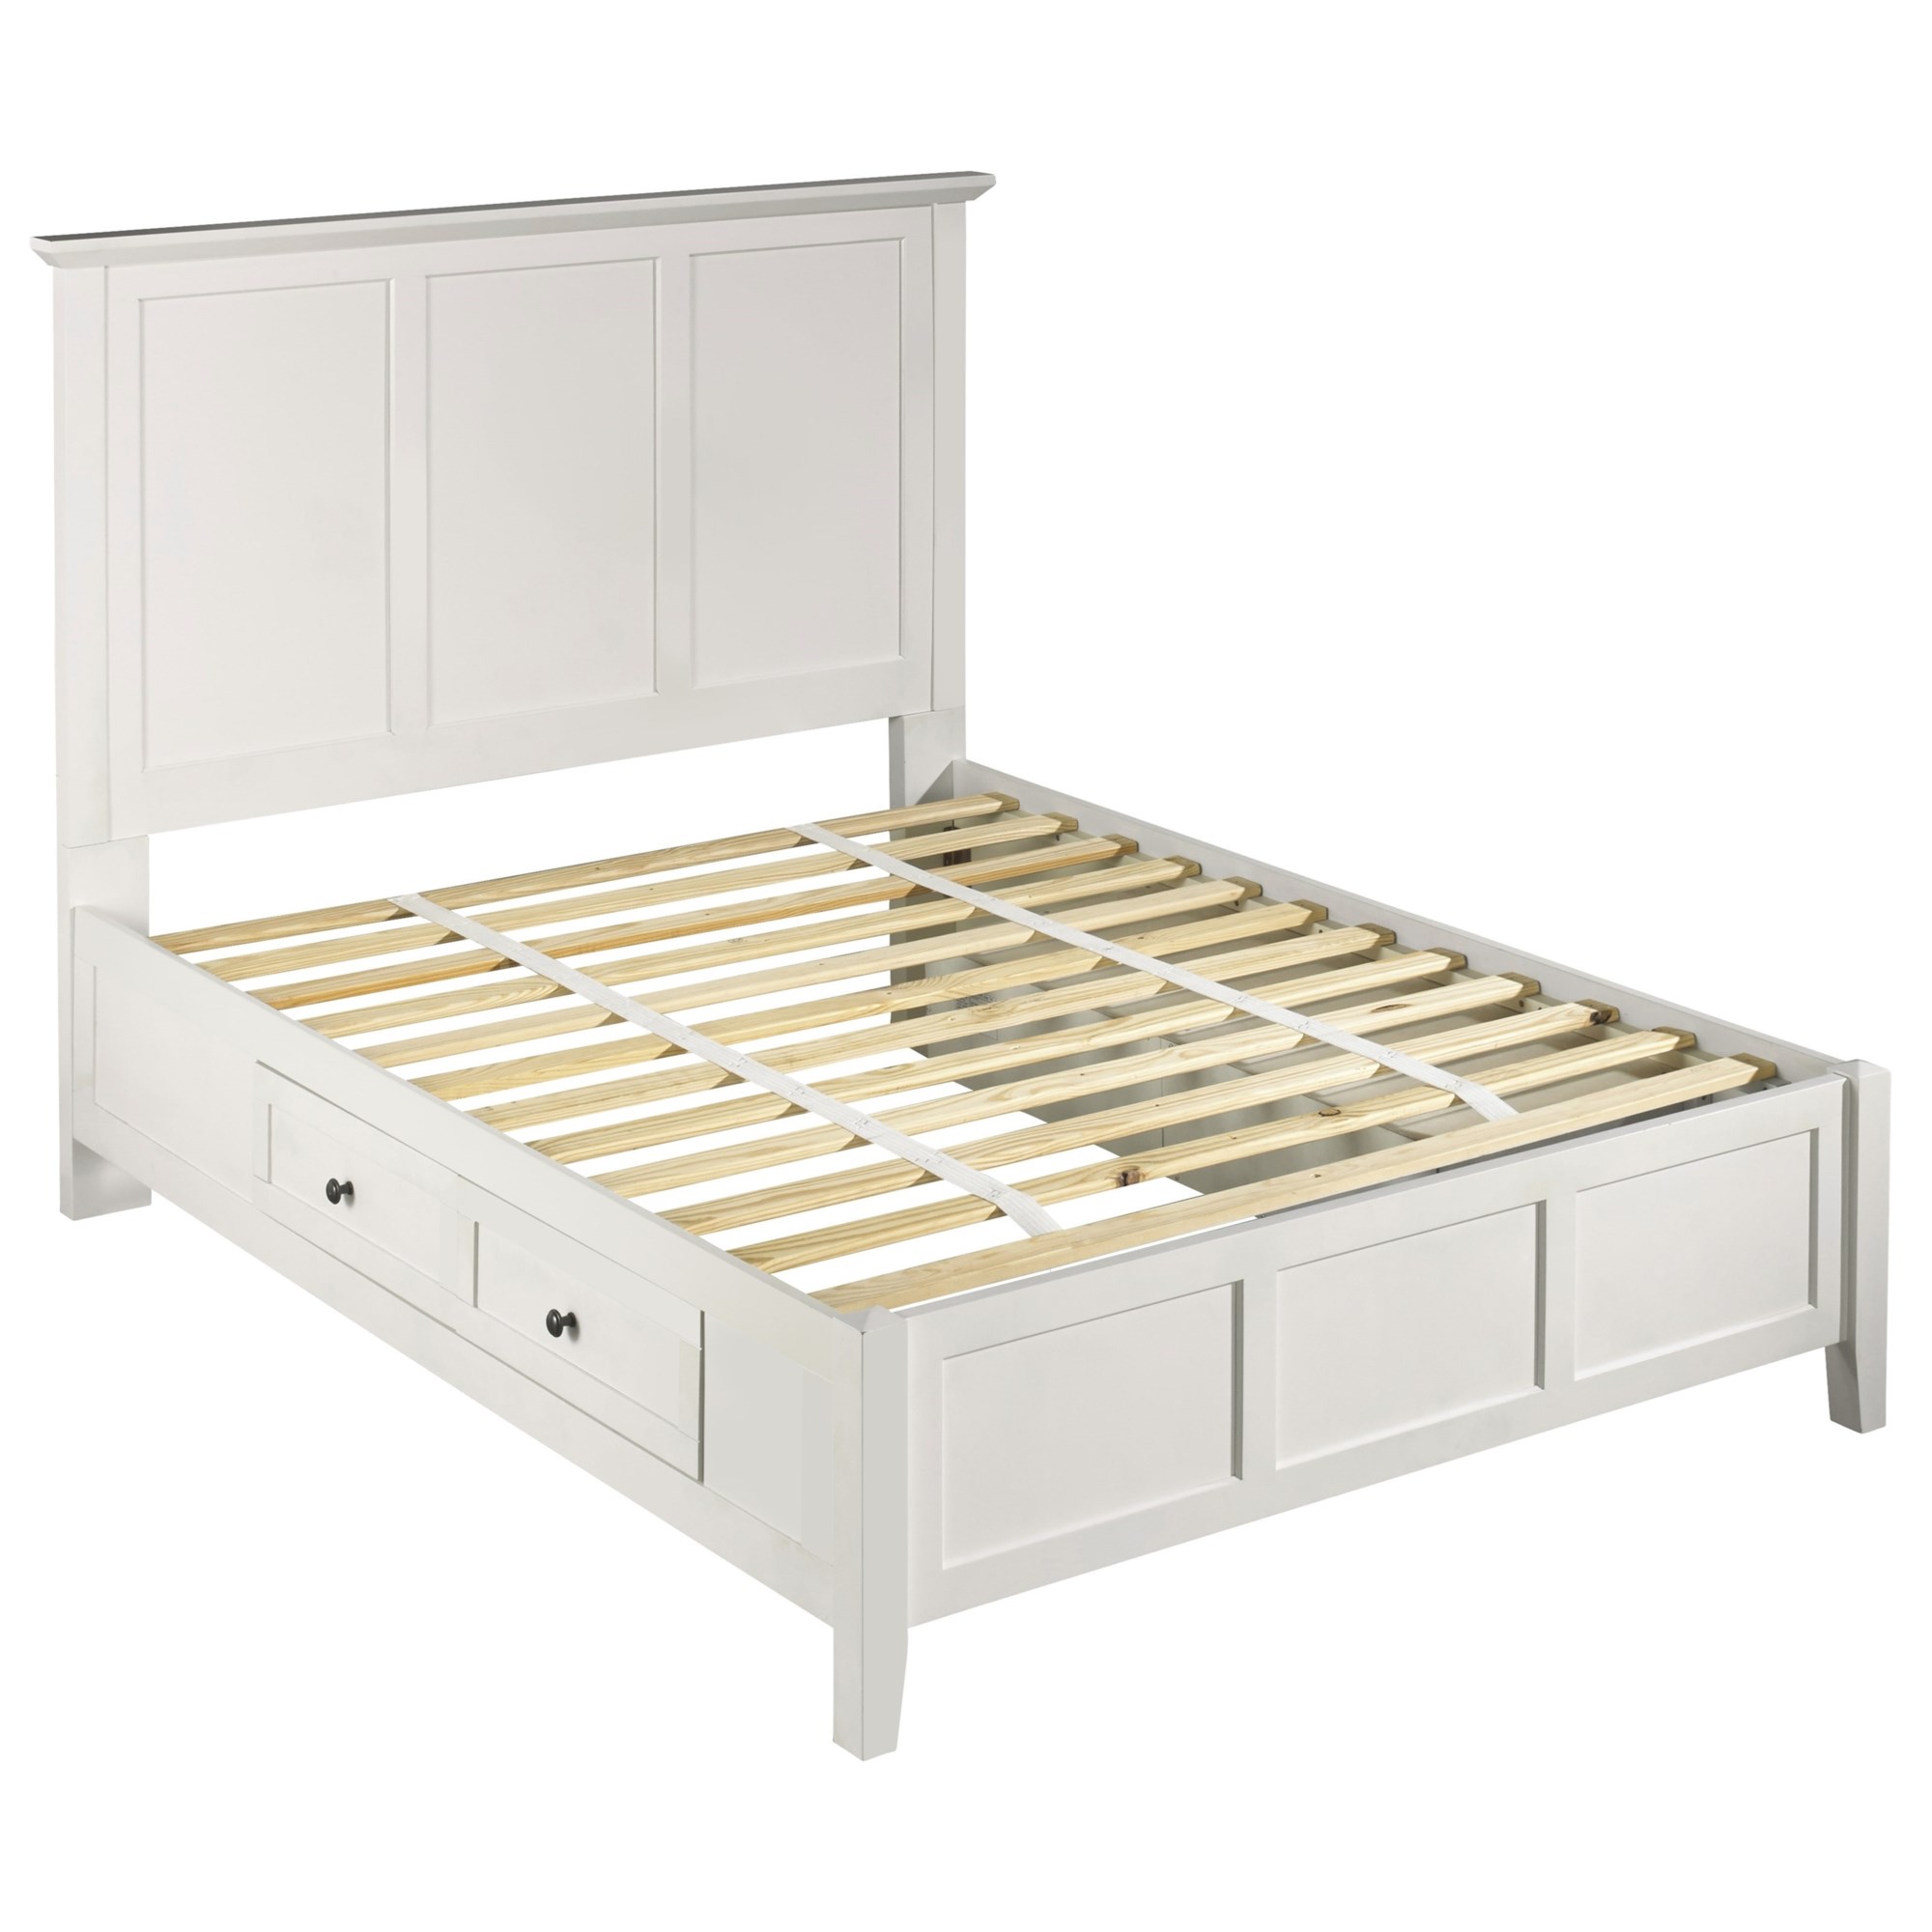 Modus International Paragon 4NA4D4 Full Shaker Style Storage Bed